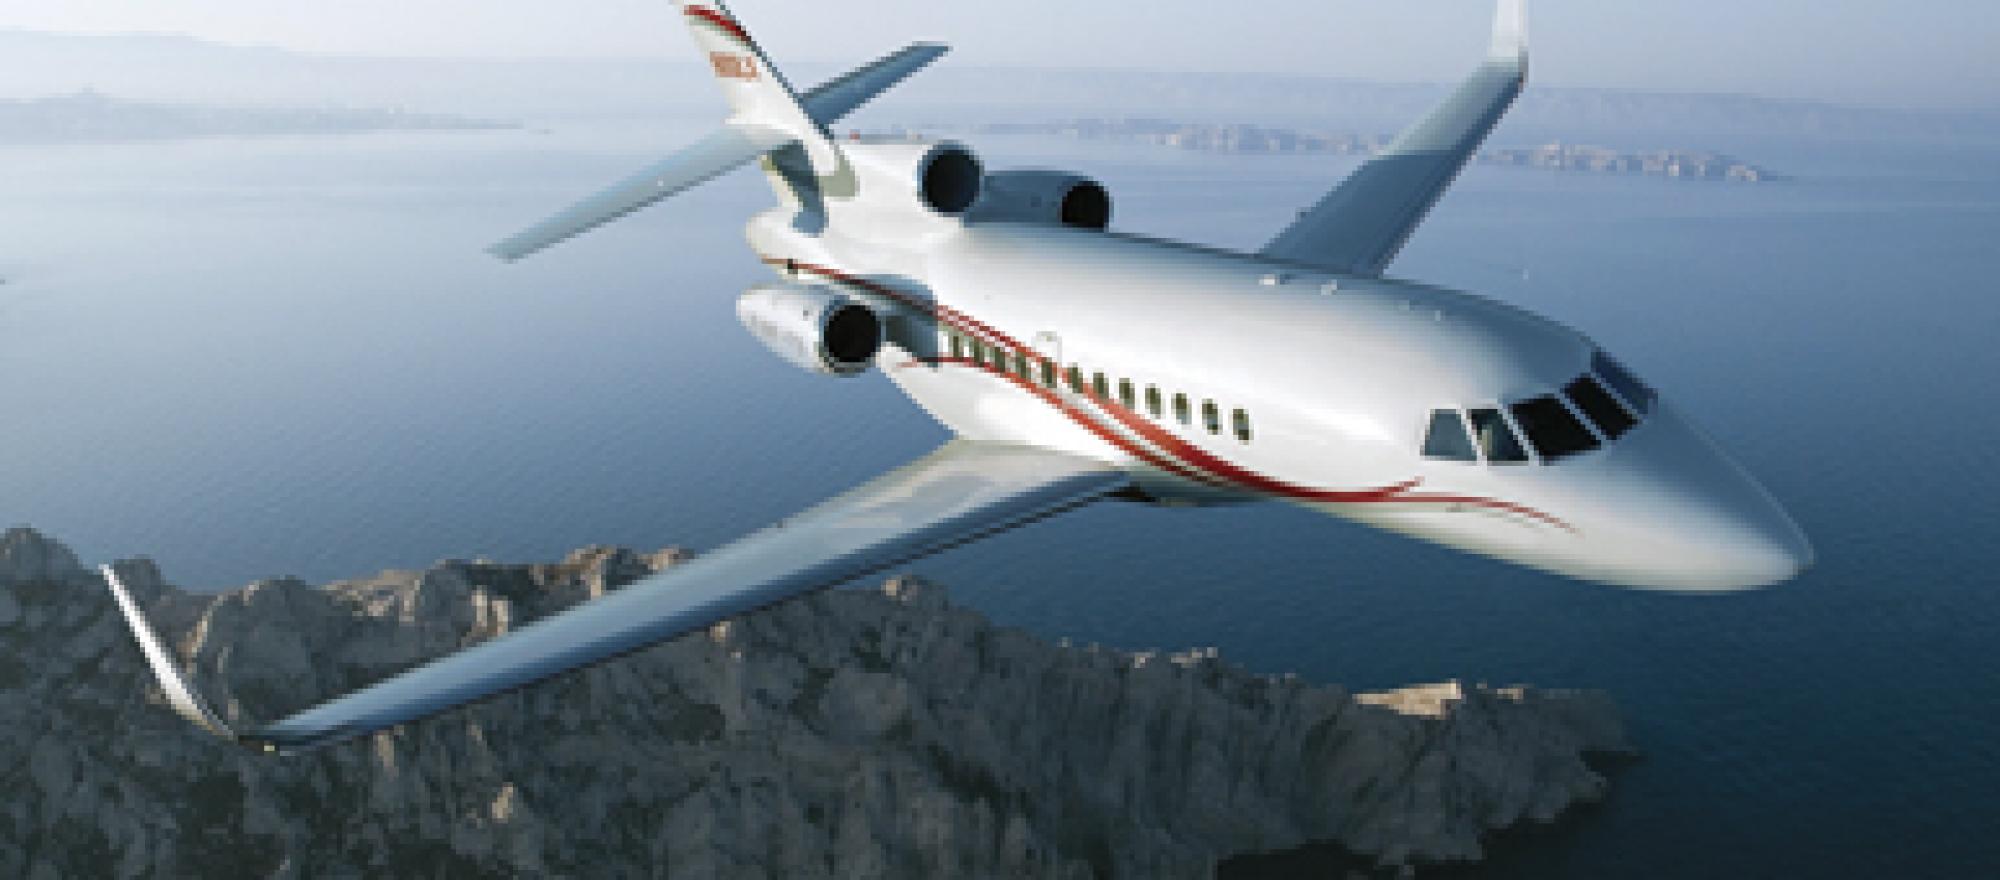 A Falcon 900 needs more maintenance than a Twinjet, but burns less fuel than 